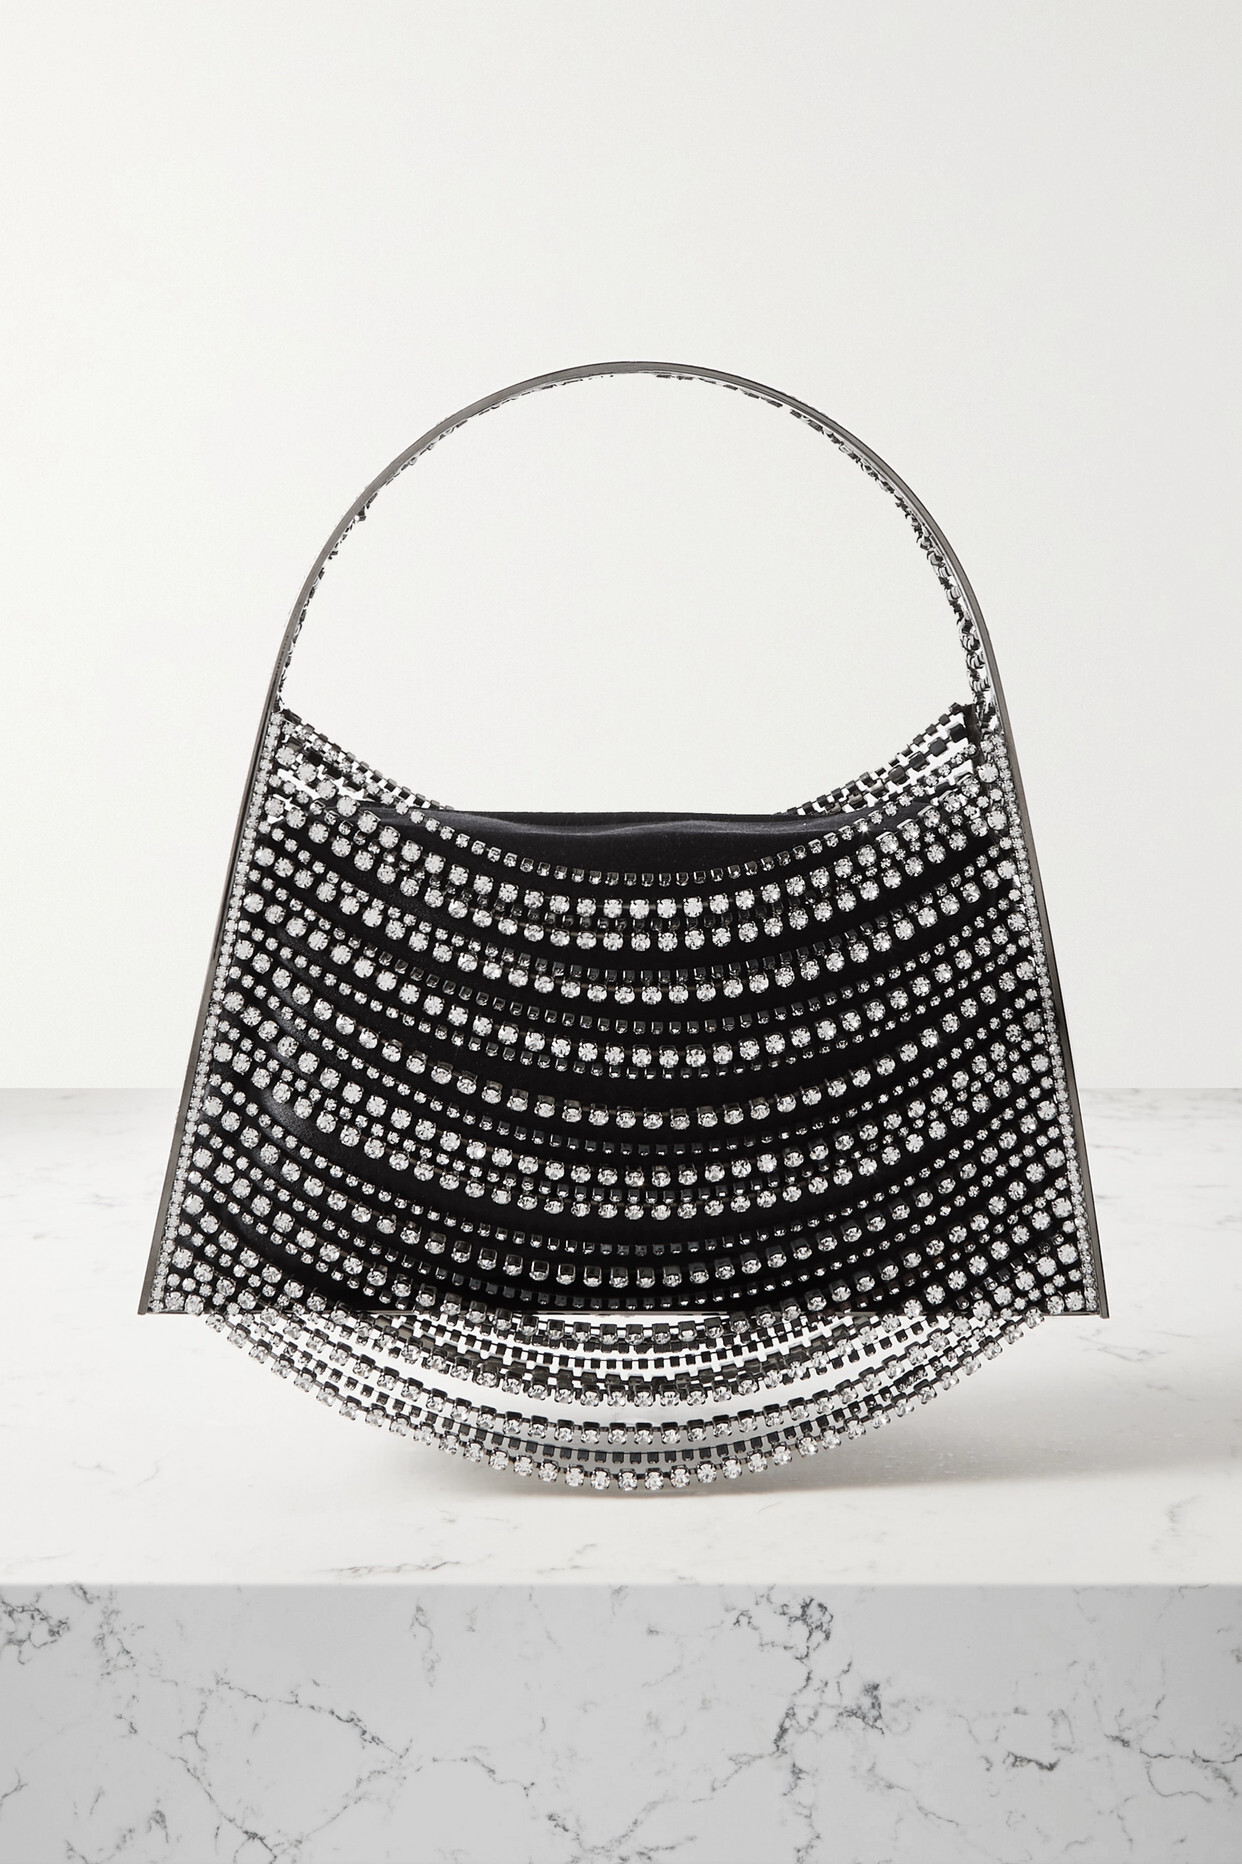 Benedetta Bruzziches - Lucia In The Sky Crystal-embellished Silver-tone And Satin Tote - Black